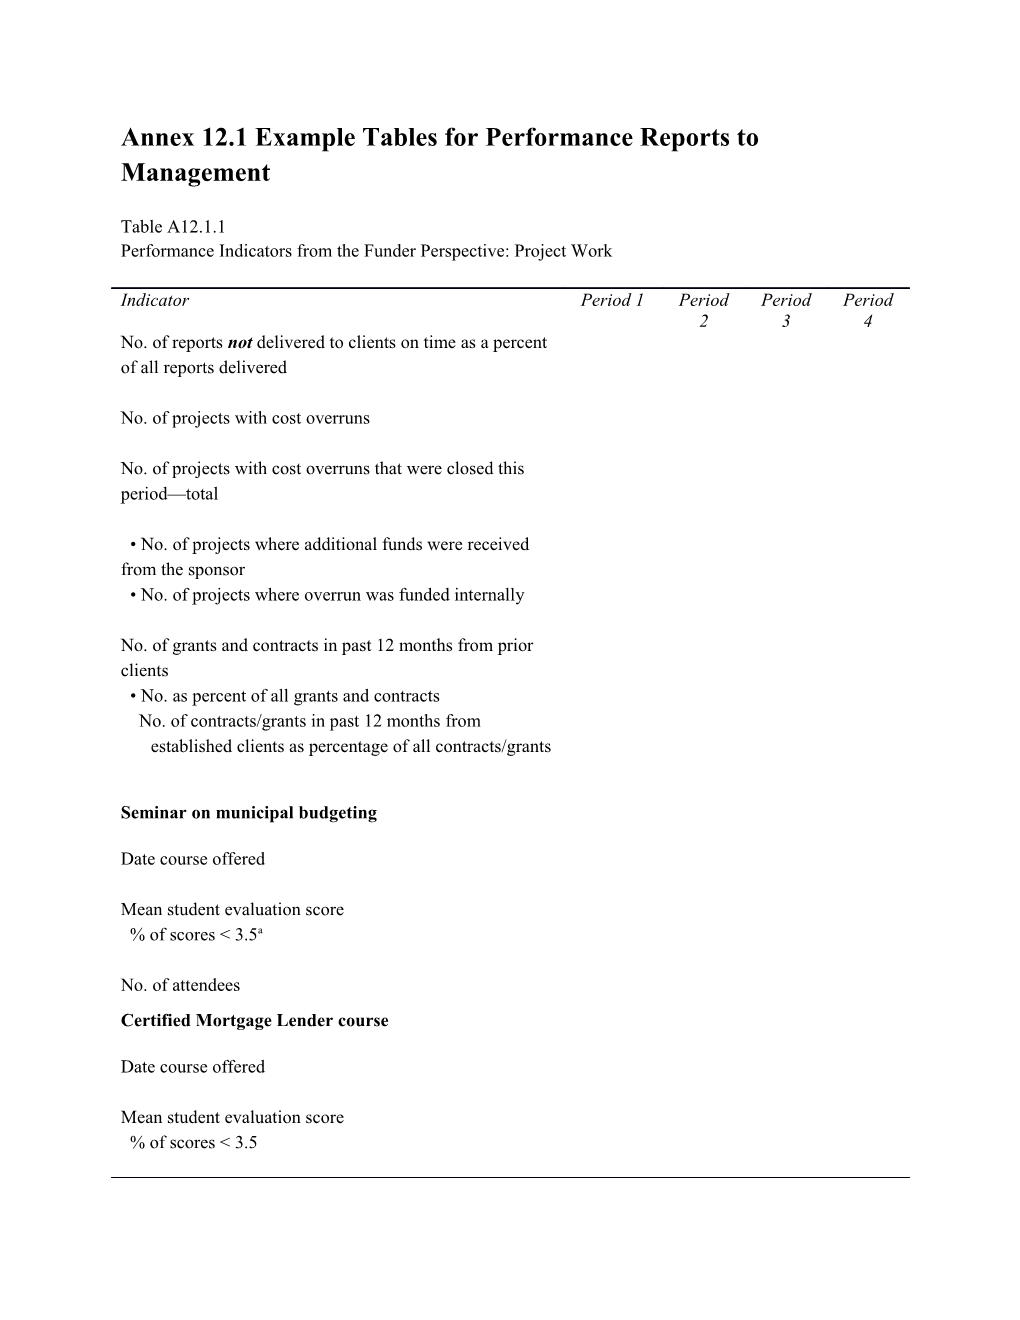 Annex 12.1 Example Tables for Performance Reports to Management